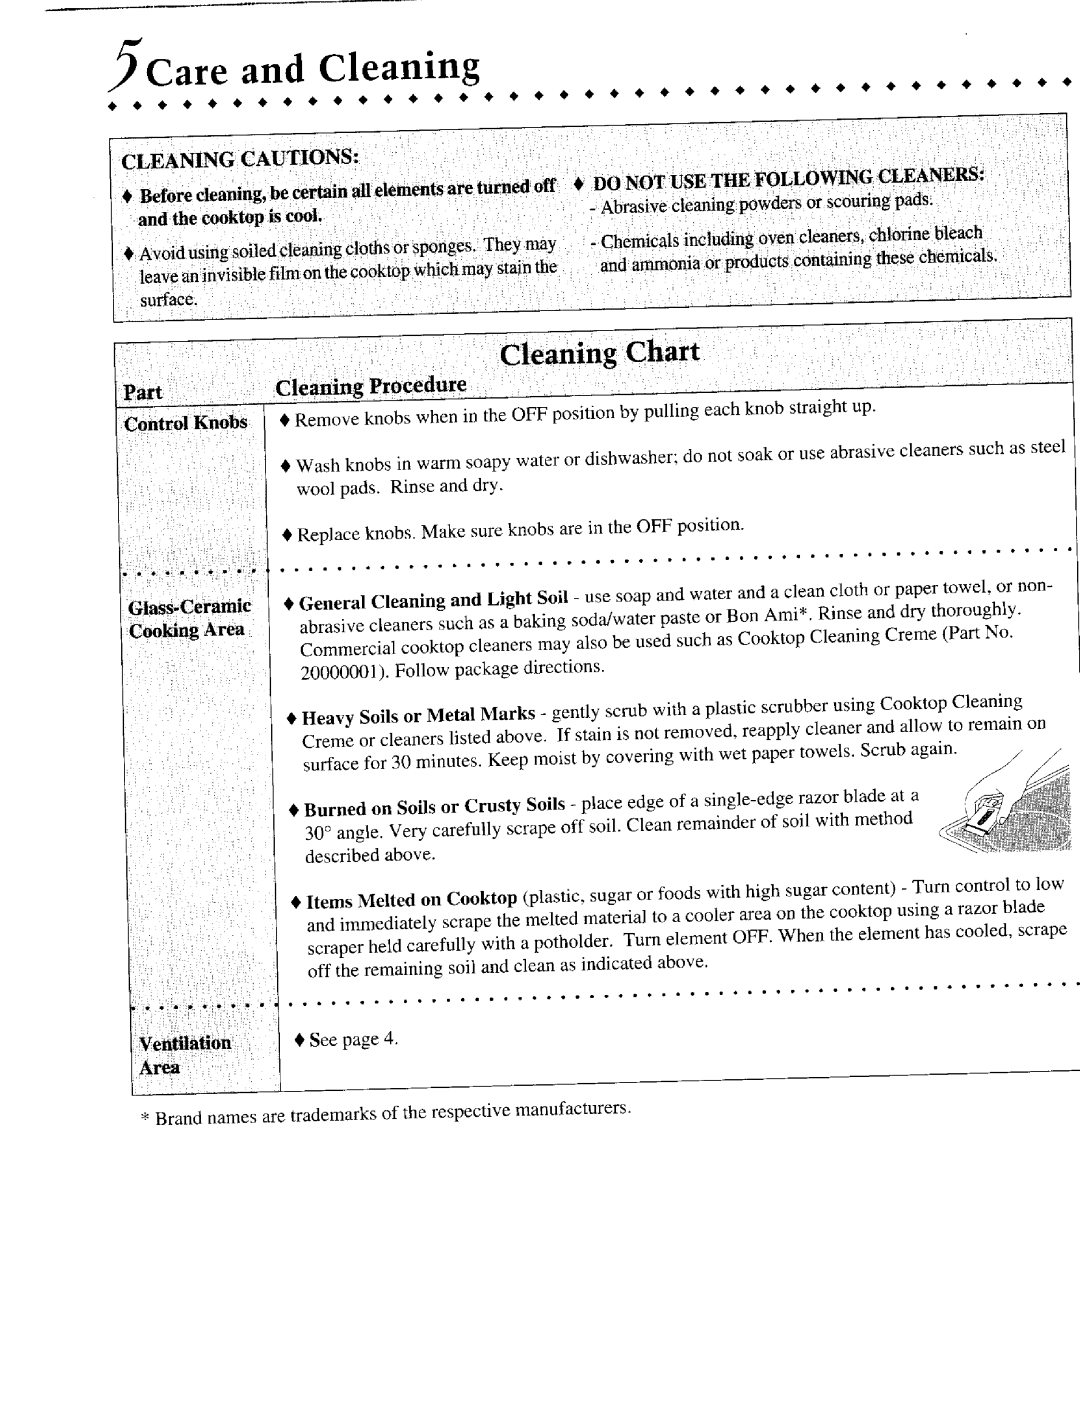 Jenn-Air CVE3401 warranty Care and Cleaning, Cleaning Chart, Cleaning Procedure 